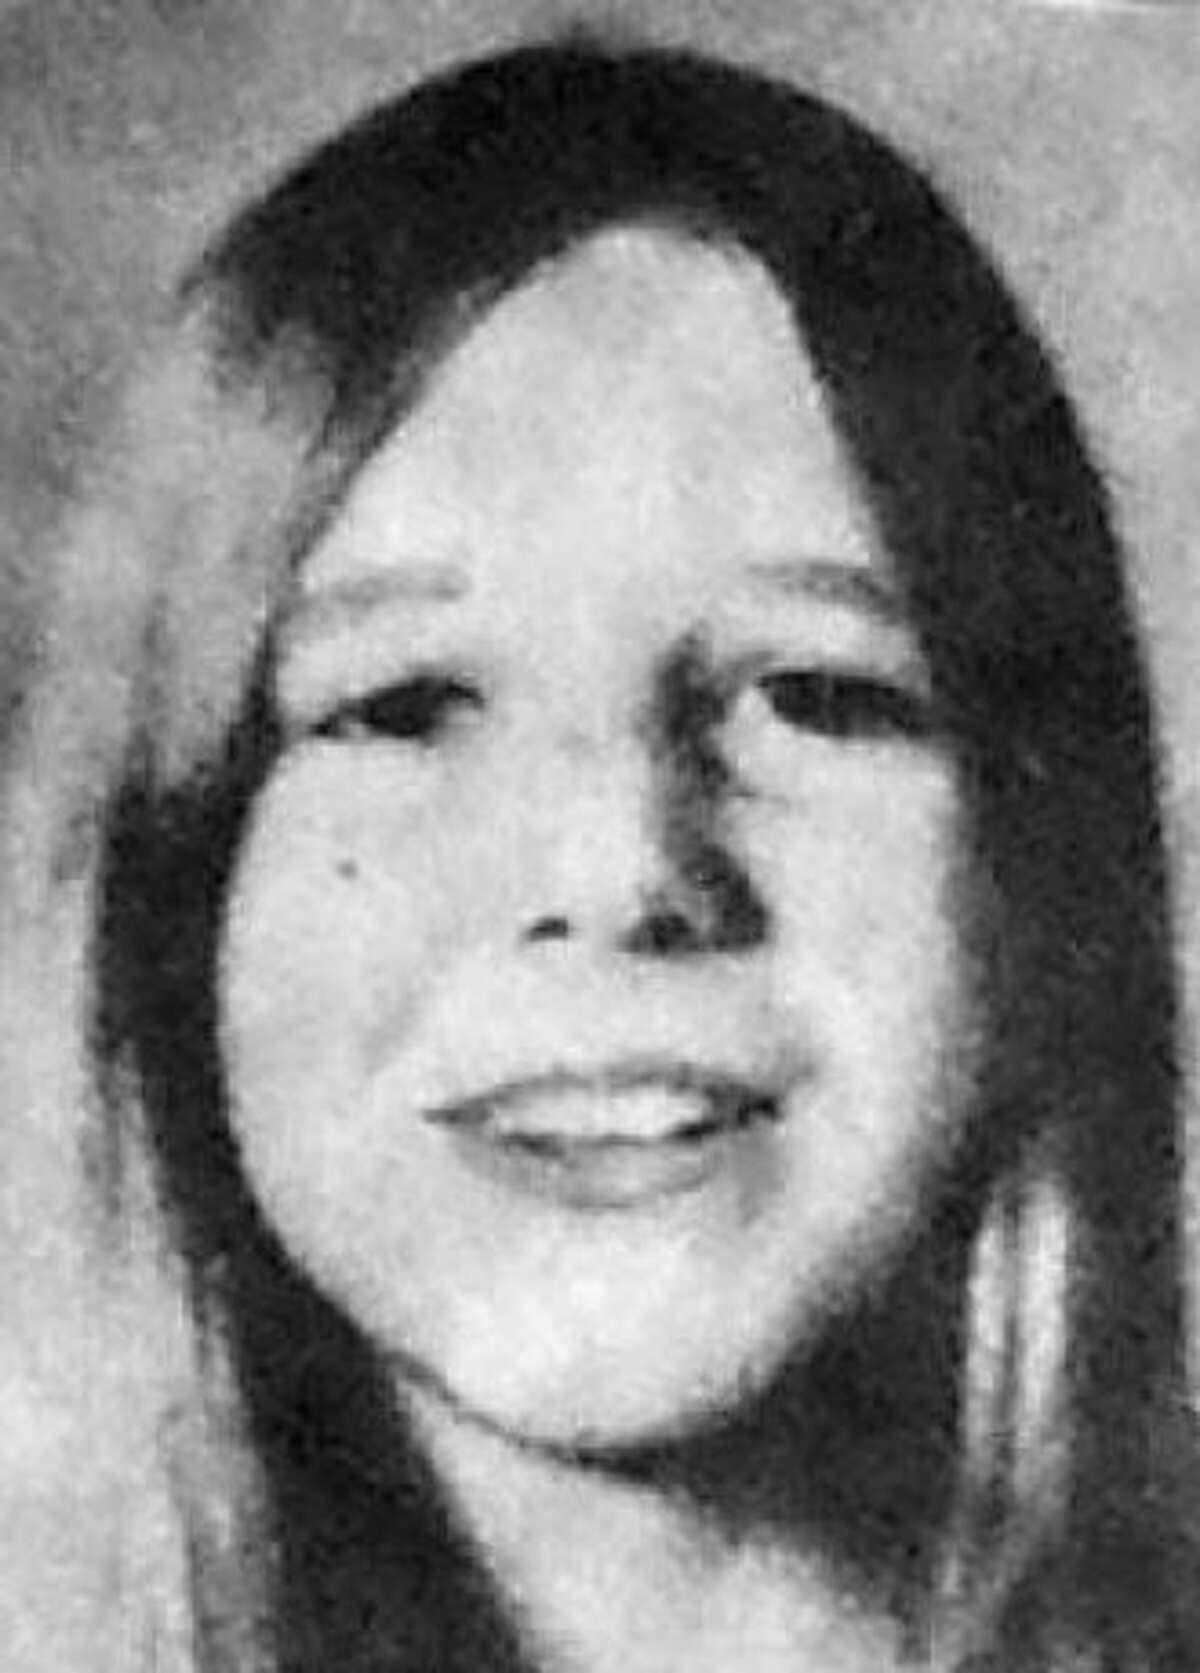 Among the 7 victims in the 1972-73 Santa Rosa Hitchhiker Murders was Yvonne Weber.